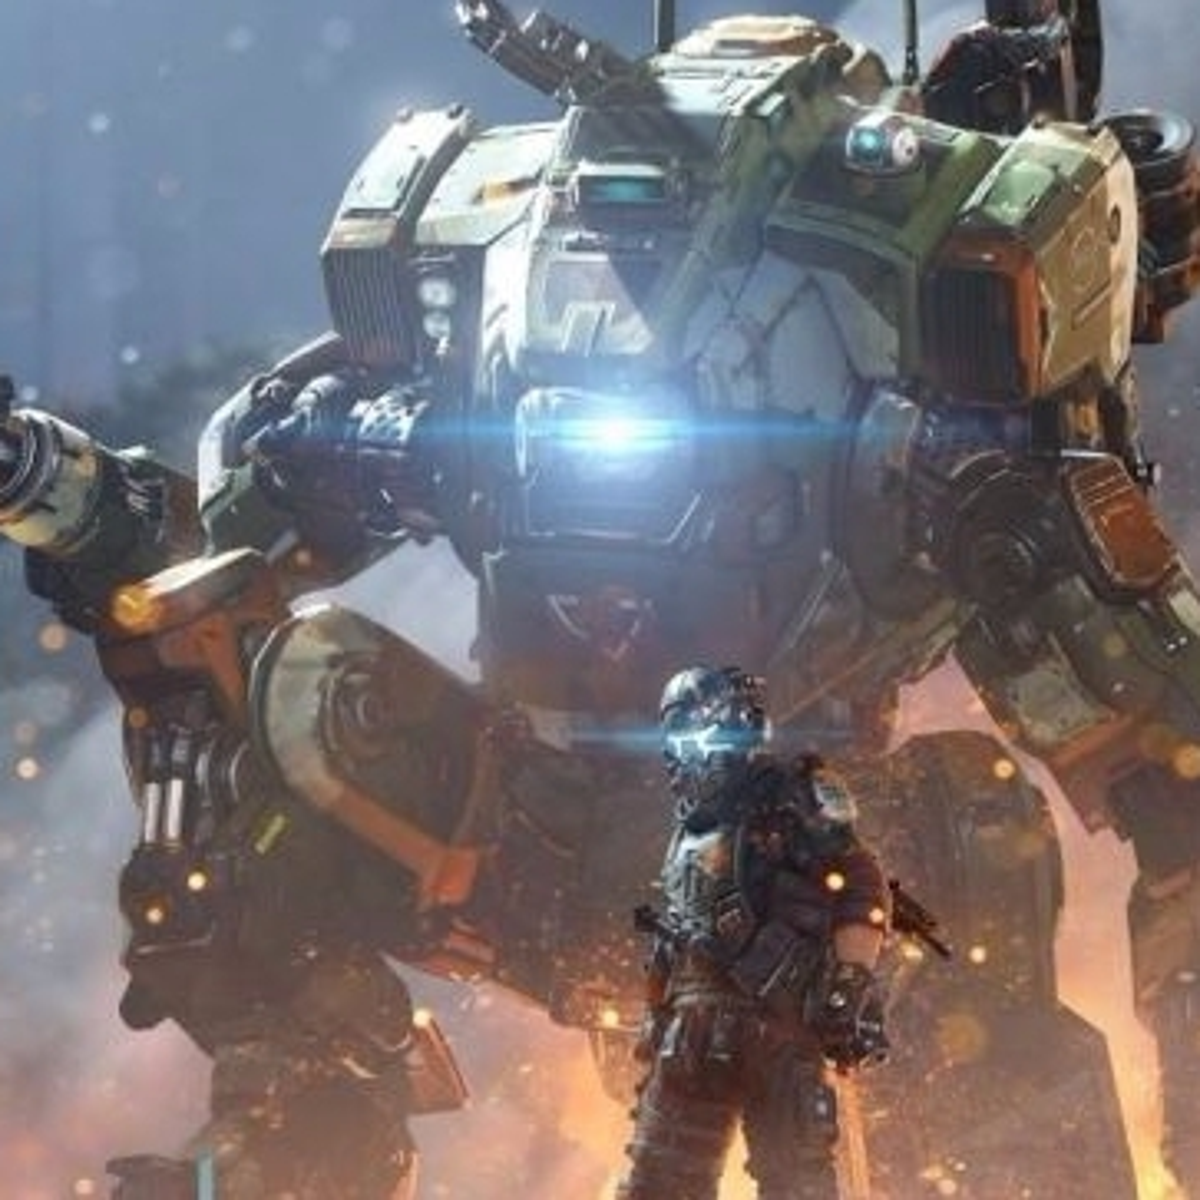 Titanfall 2: Every Single Titan and What They Do - GameSpot